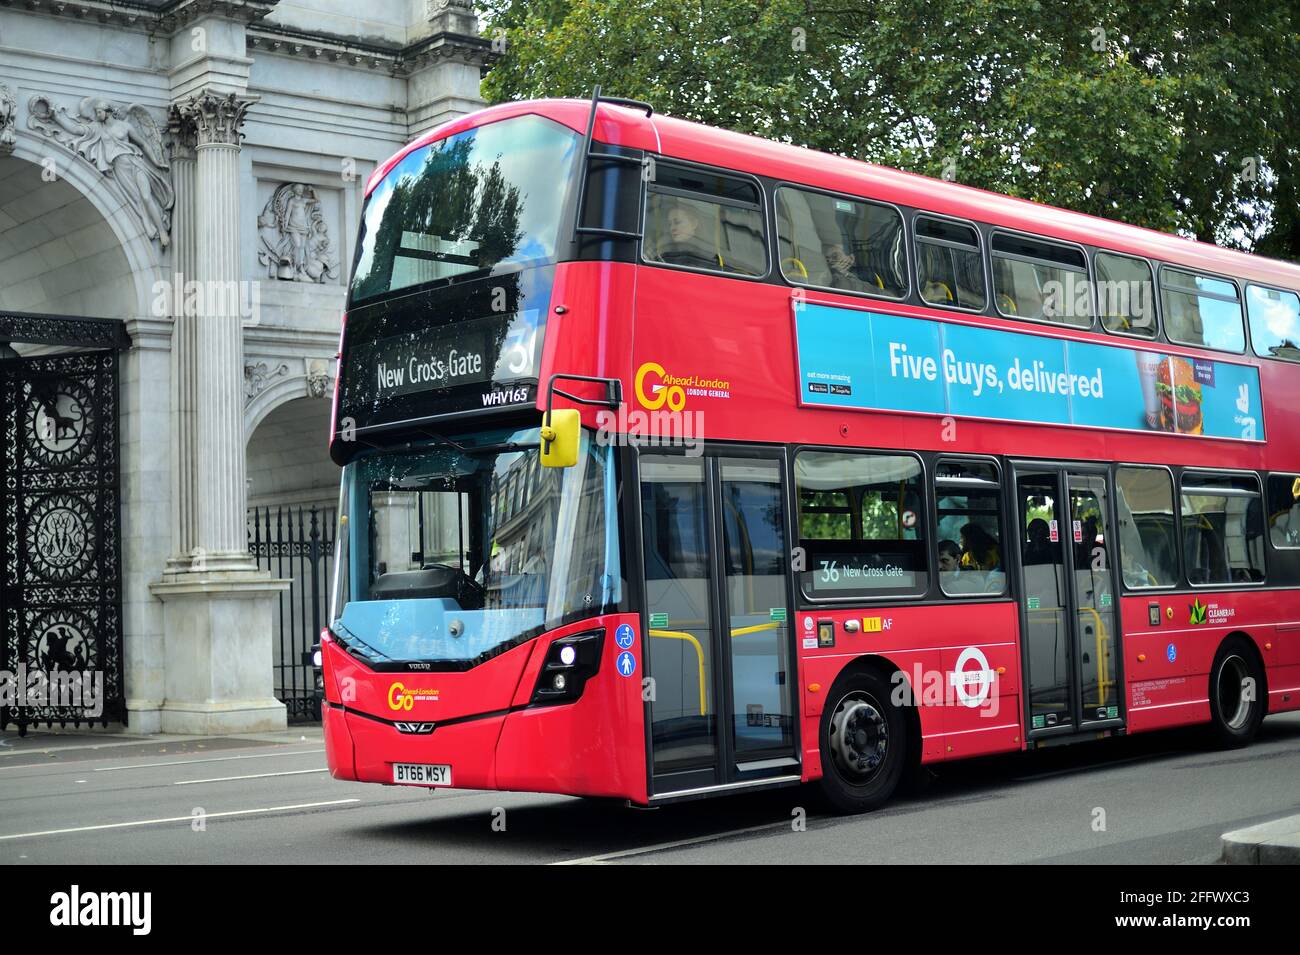 London England United Kingdom A Double Decker Bus Passing By Marble Arch Red Double Decker Buses Have Long Been A Recognizable Symbol Of London Stock Photo Alamy